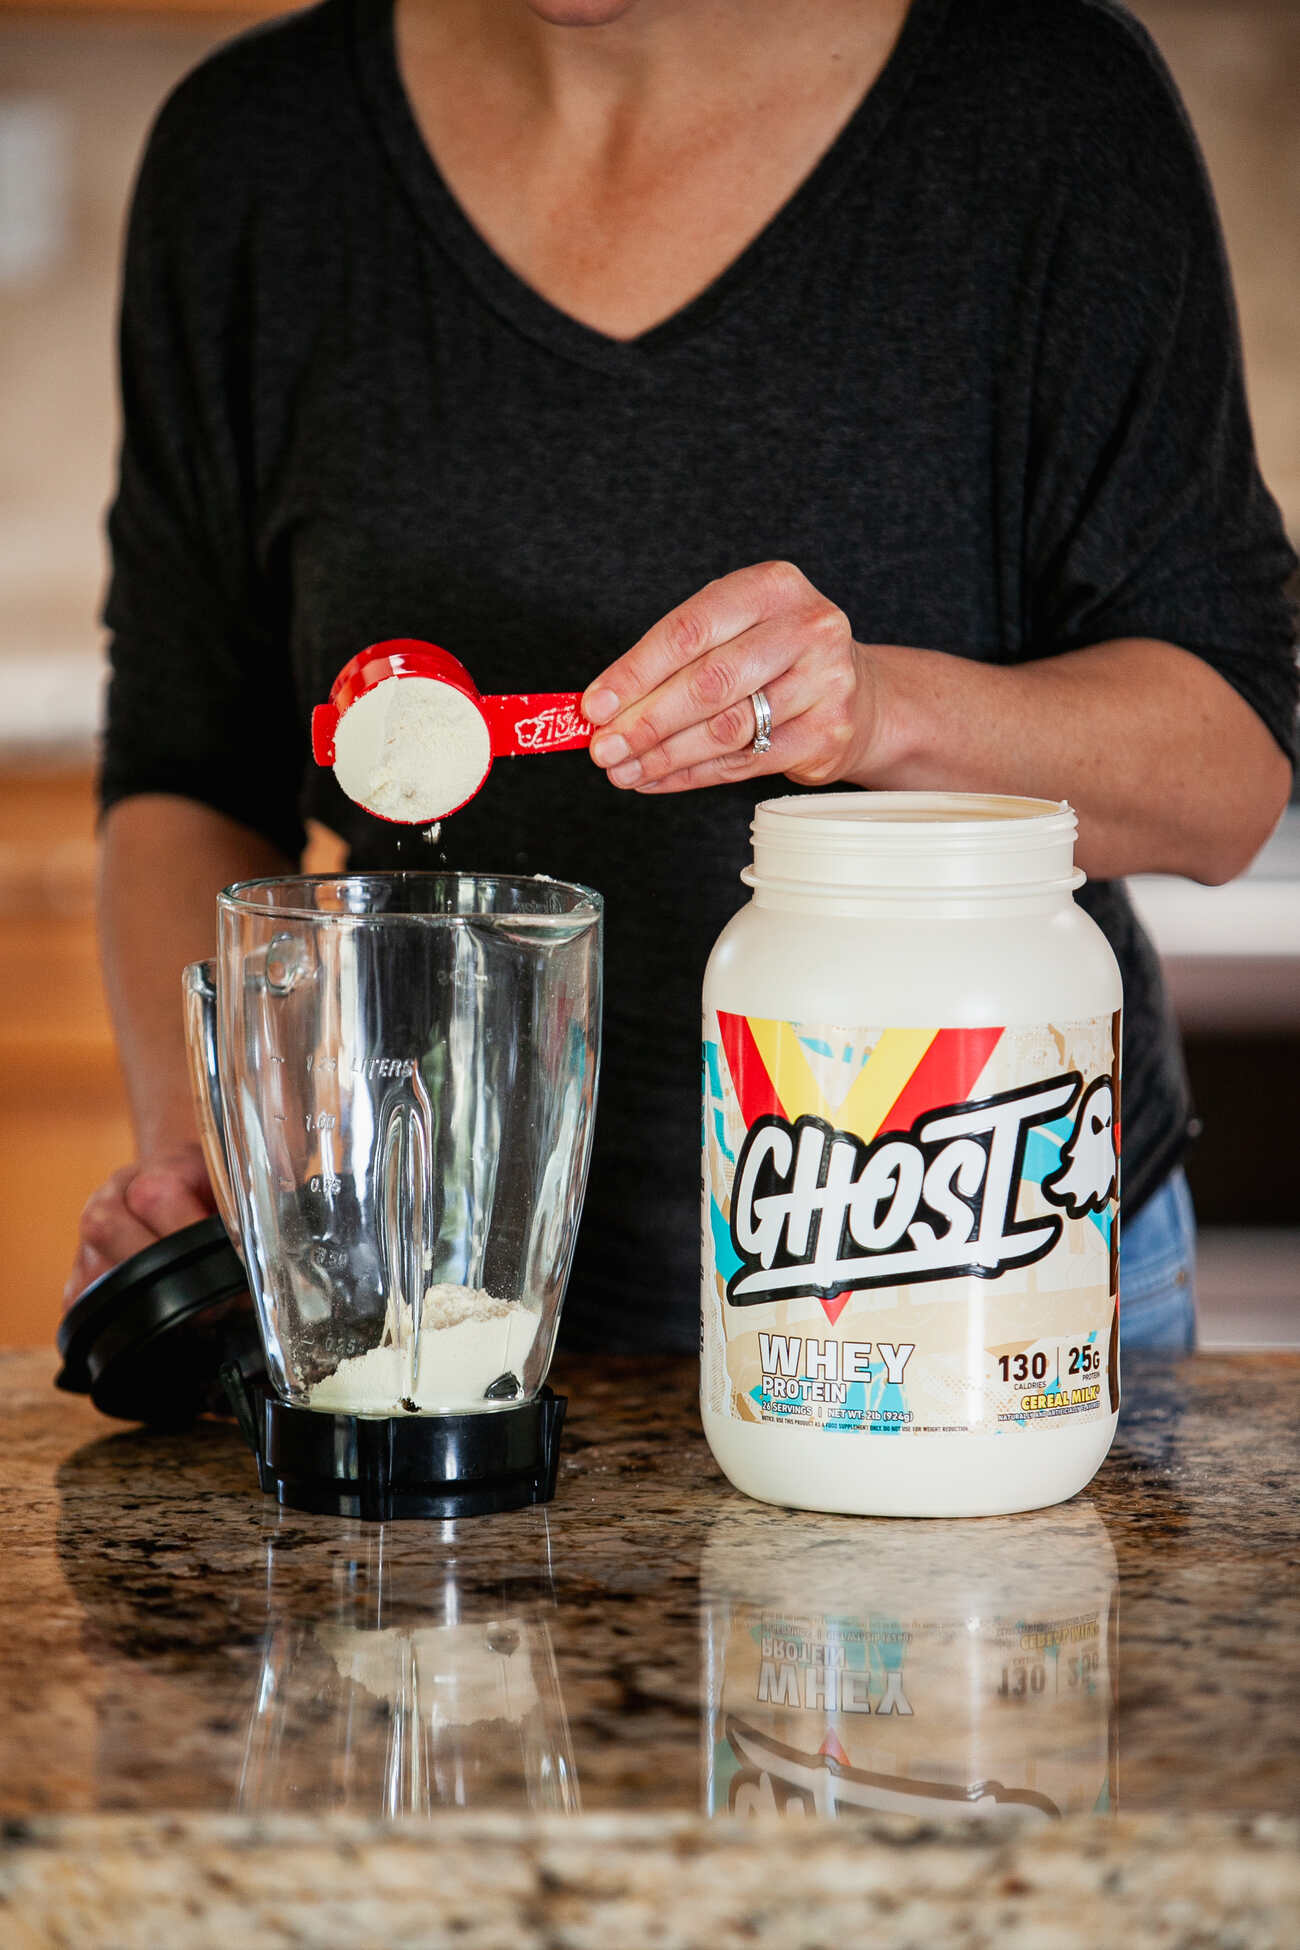 A person in a black top is scooping powder from a Ghost Whey Protein container into a blender on a kitchen countertop